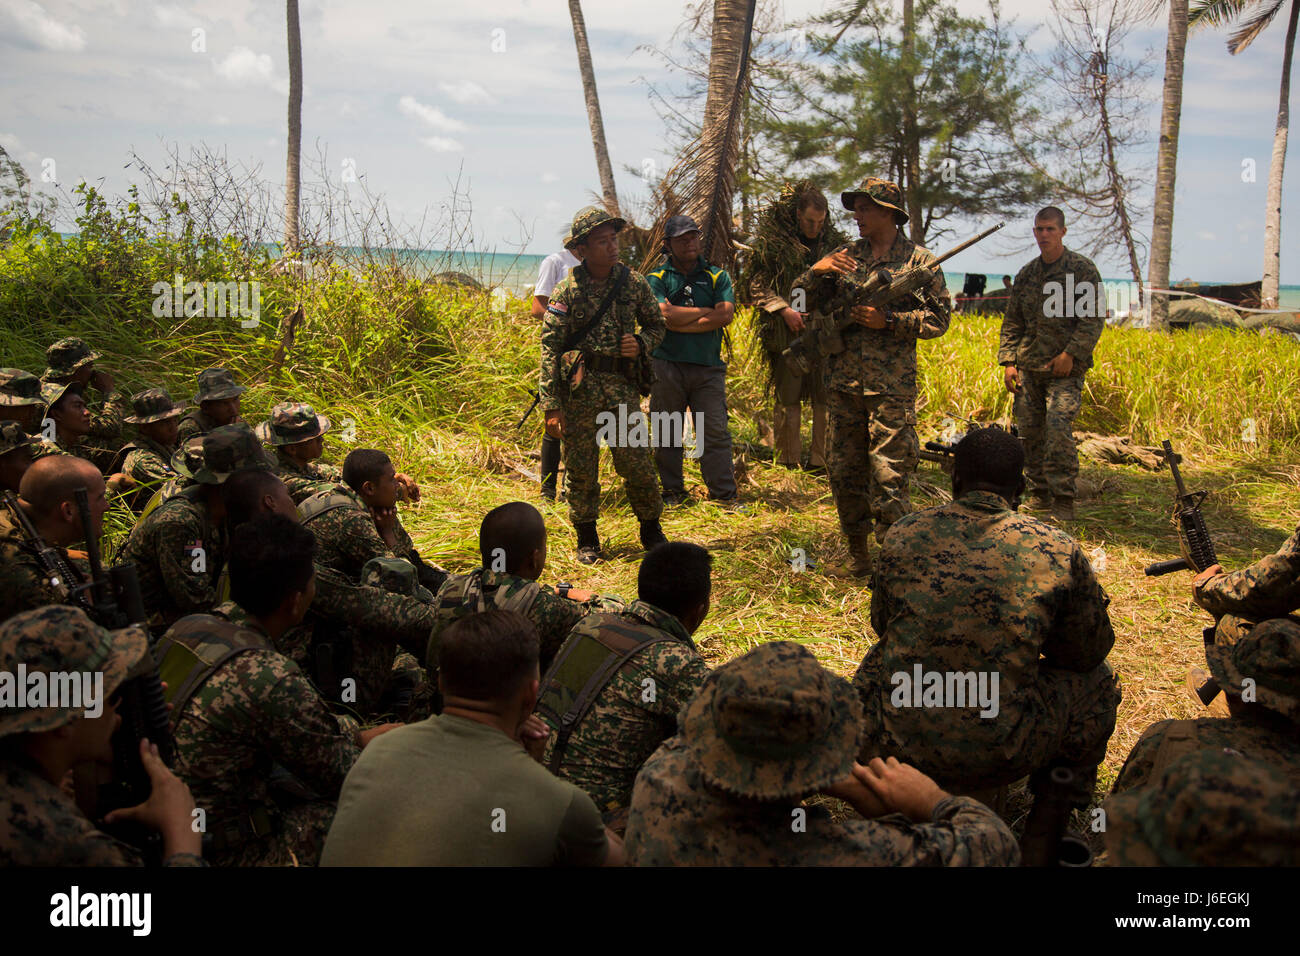 U.S. Marine Corps Cpl. Danny VillaGomez, a rifle man with Golf Company, 2nd Battalion, 4th Marine Regiment, gives a class to Malaysian soldiers about the M110 Semi-Automatic Sniper System during Landing Force Cooperation Afloat Readiness and Training (LF CARAT) 2015 at Tanduo Beach, East Sabah, Malaysia, Aug. 17, 2015. LF CARAT is meant to strengthen, increase the interoperability in amphibious planning and operations and the core skill sets between the United States and the nations of Indonesia, Malaysia, and Thailand. (U.S. Marine Corps photo by MCIPAC Combat Camera Lance Cpl. Sergio Ramirez Stock Photo